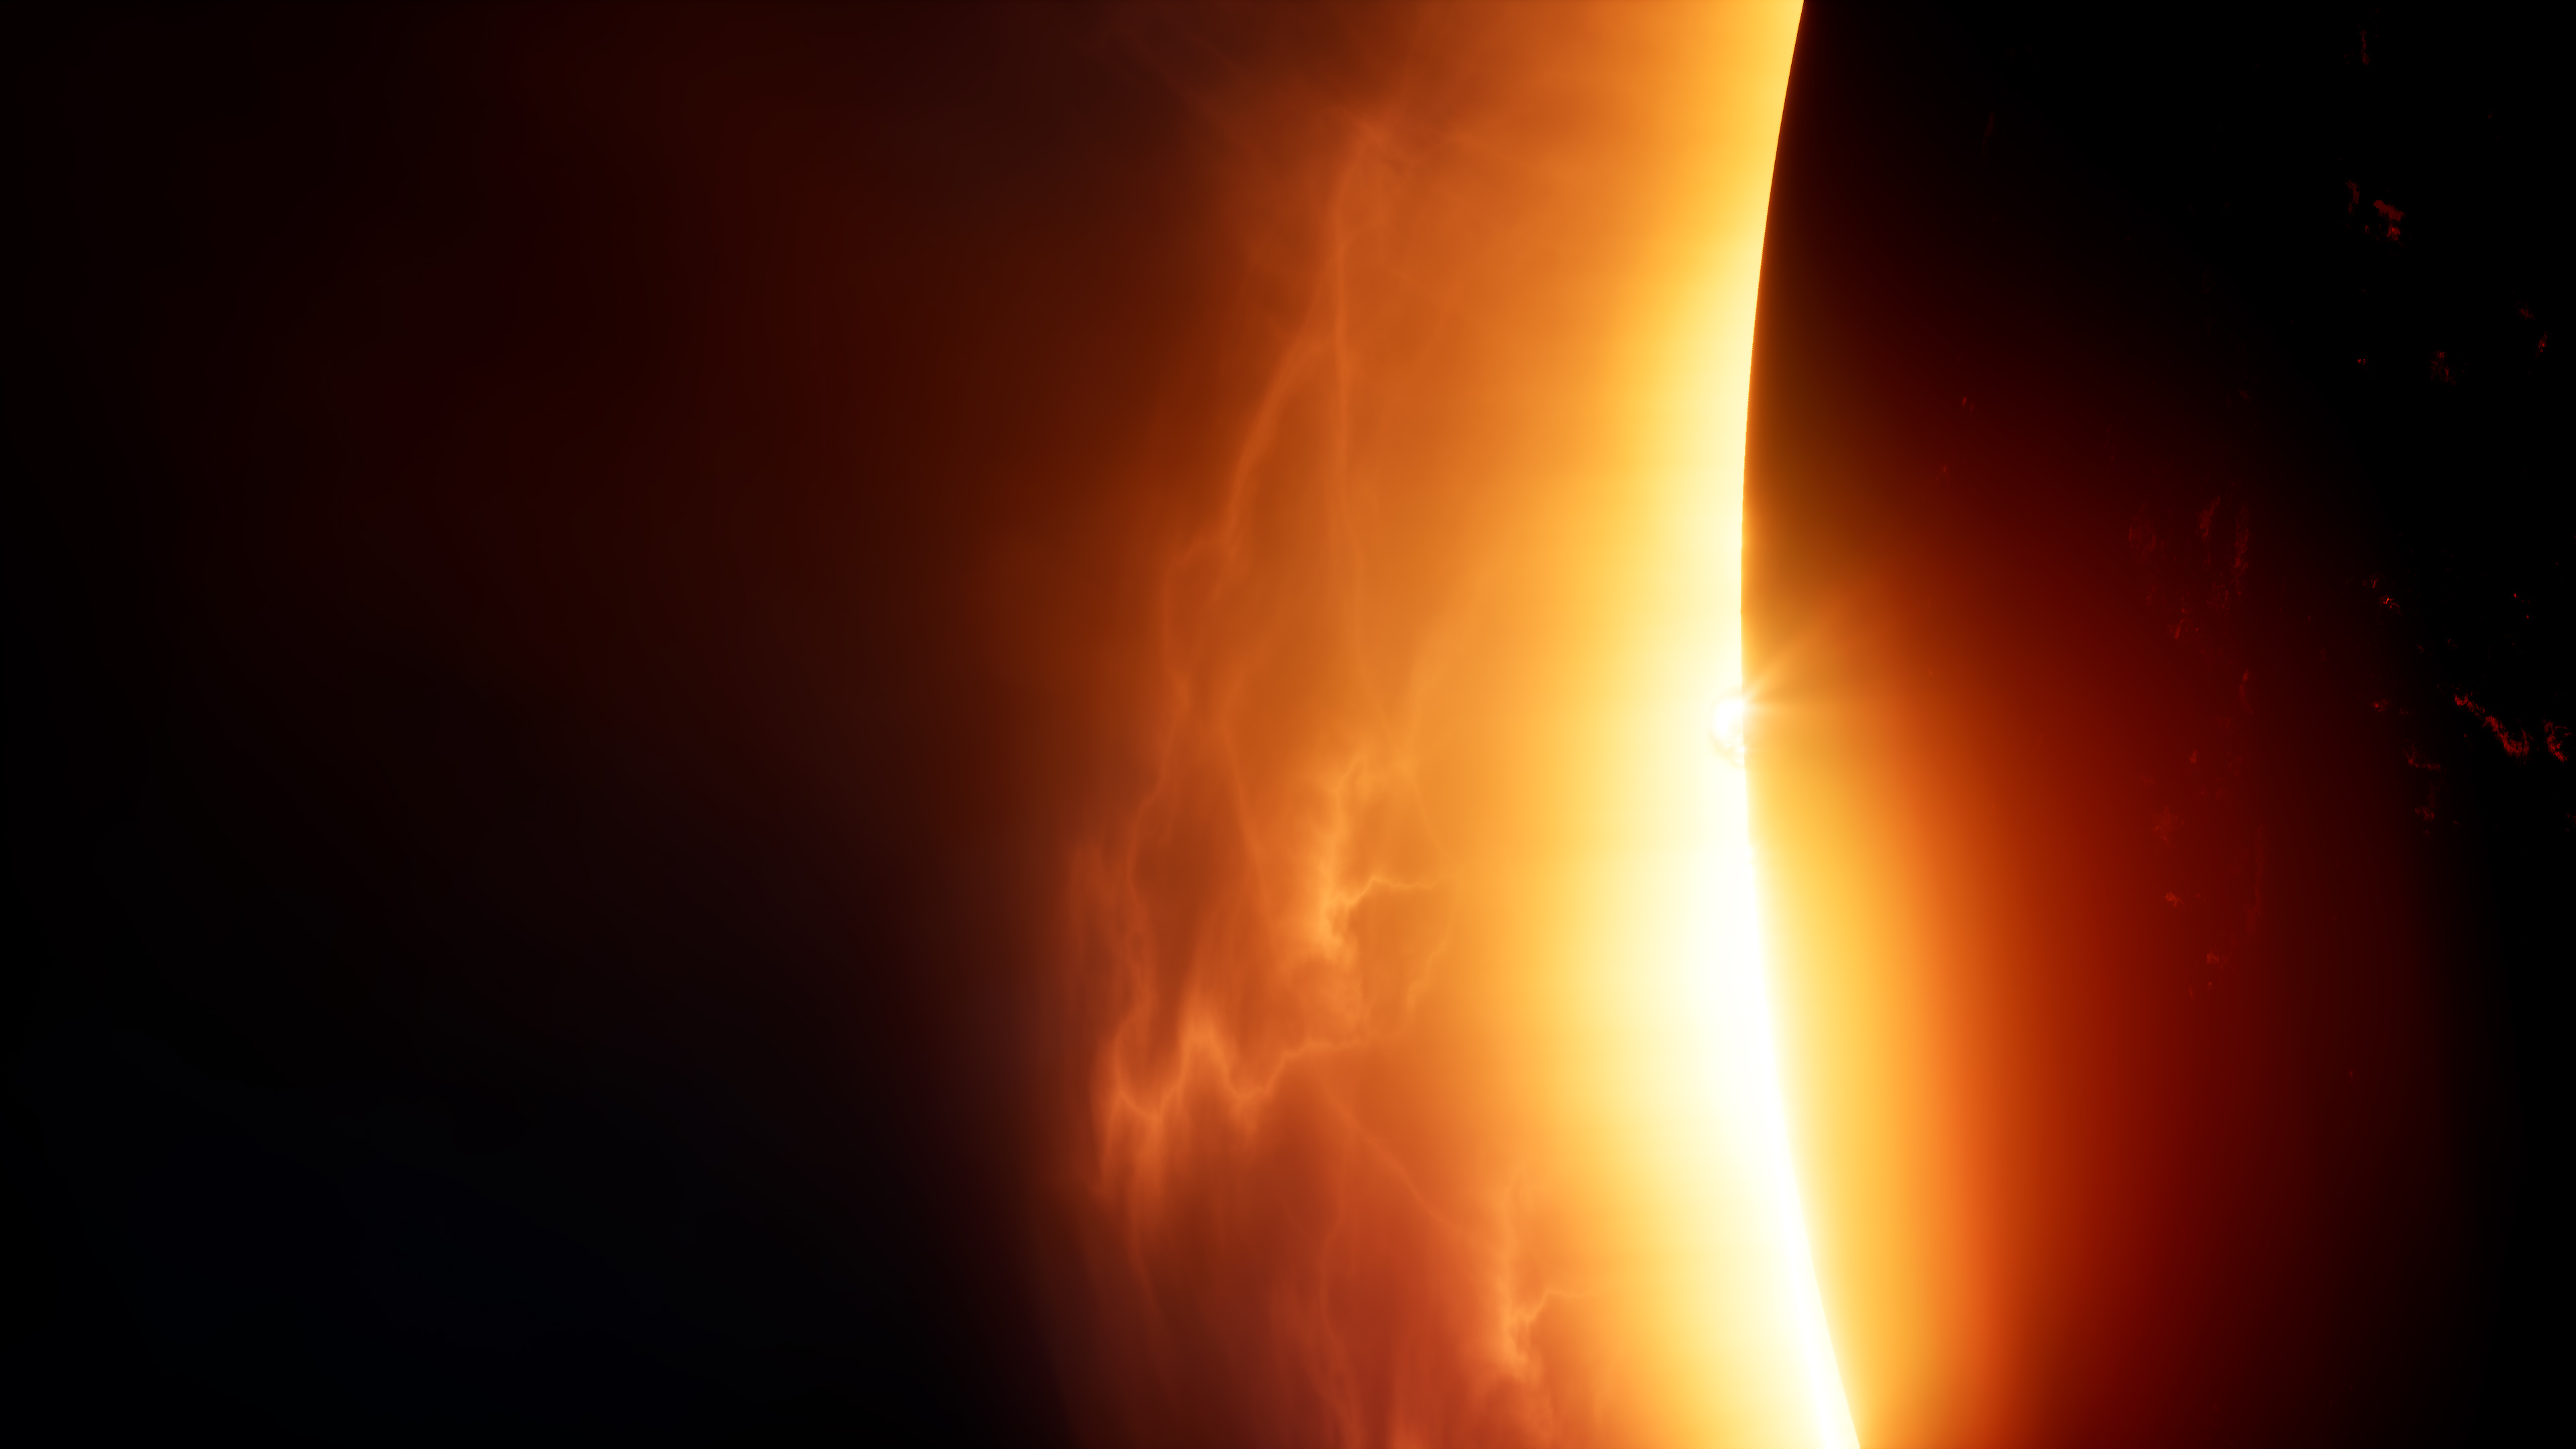 Rocky lava planet eclipsing its star.